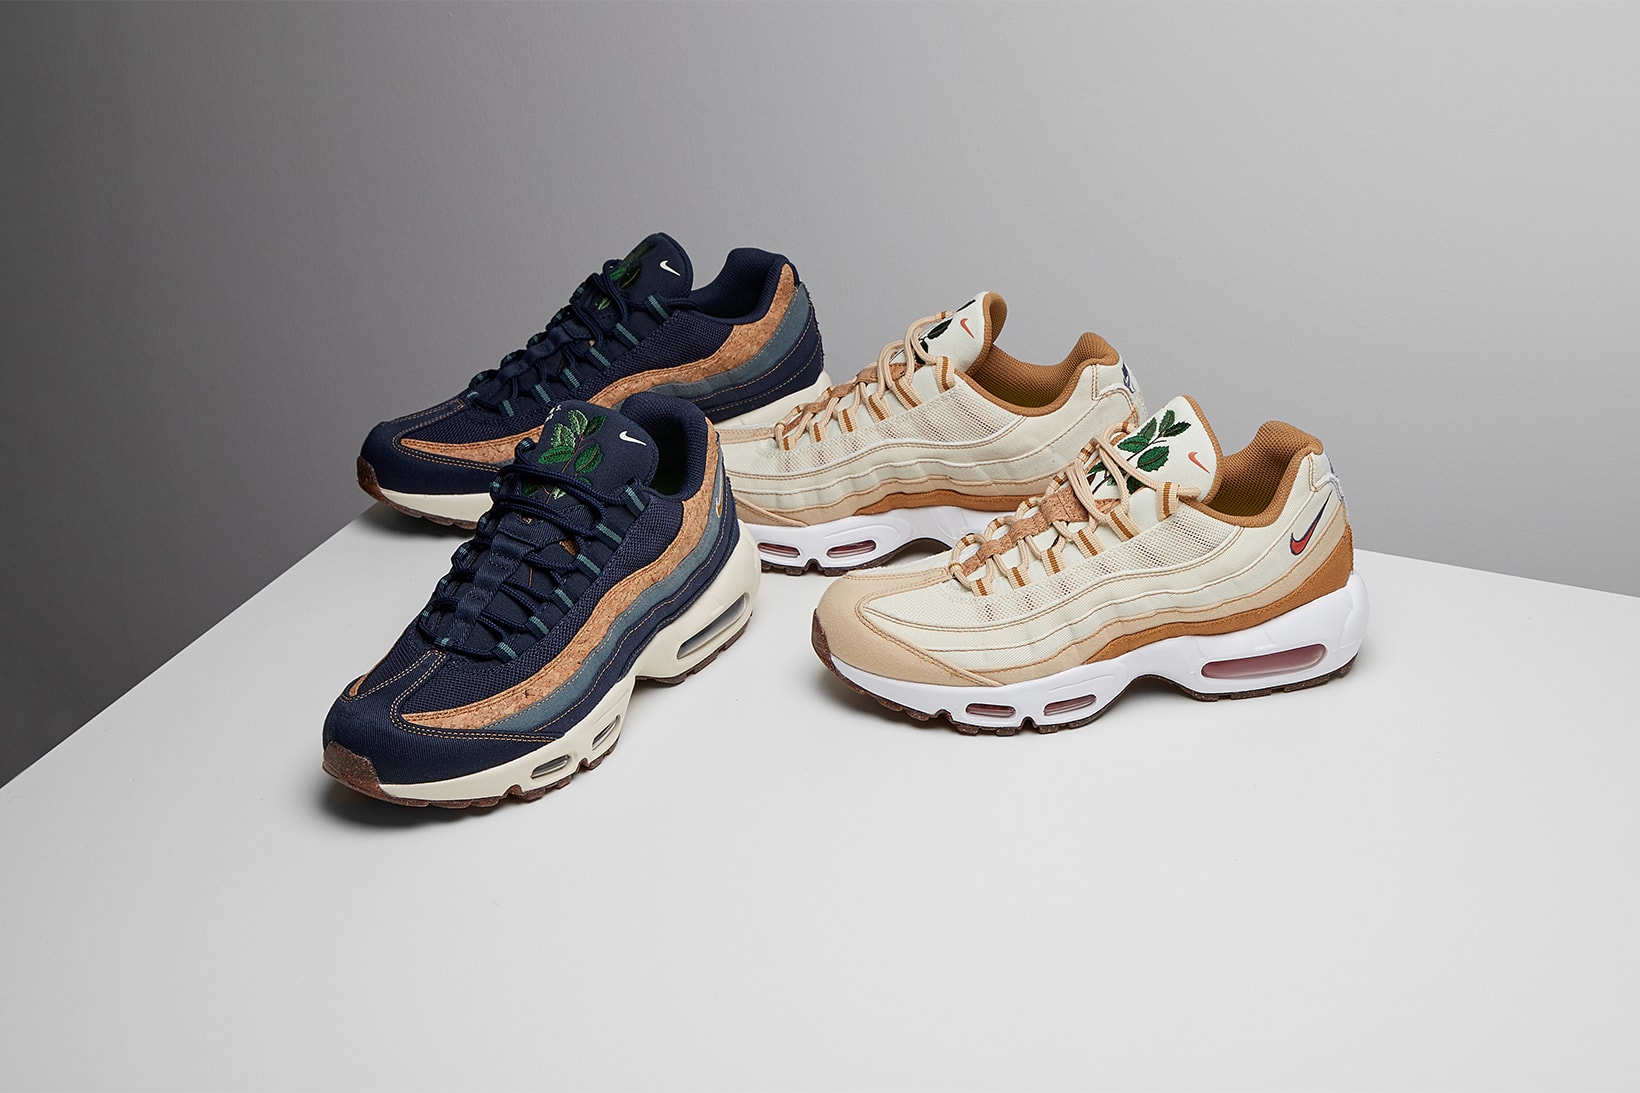 nike air max 95 am95 plant based sustainable pack cork coconut milk obsidian wheat blue footwear shoes kicks